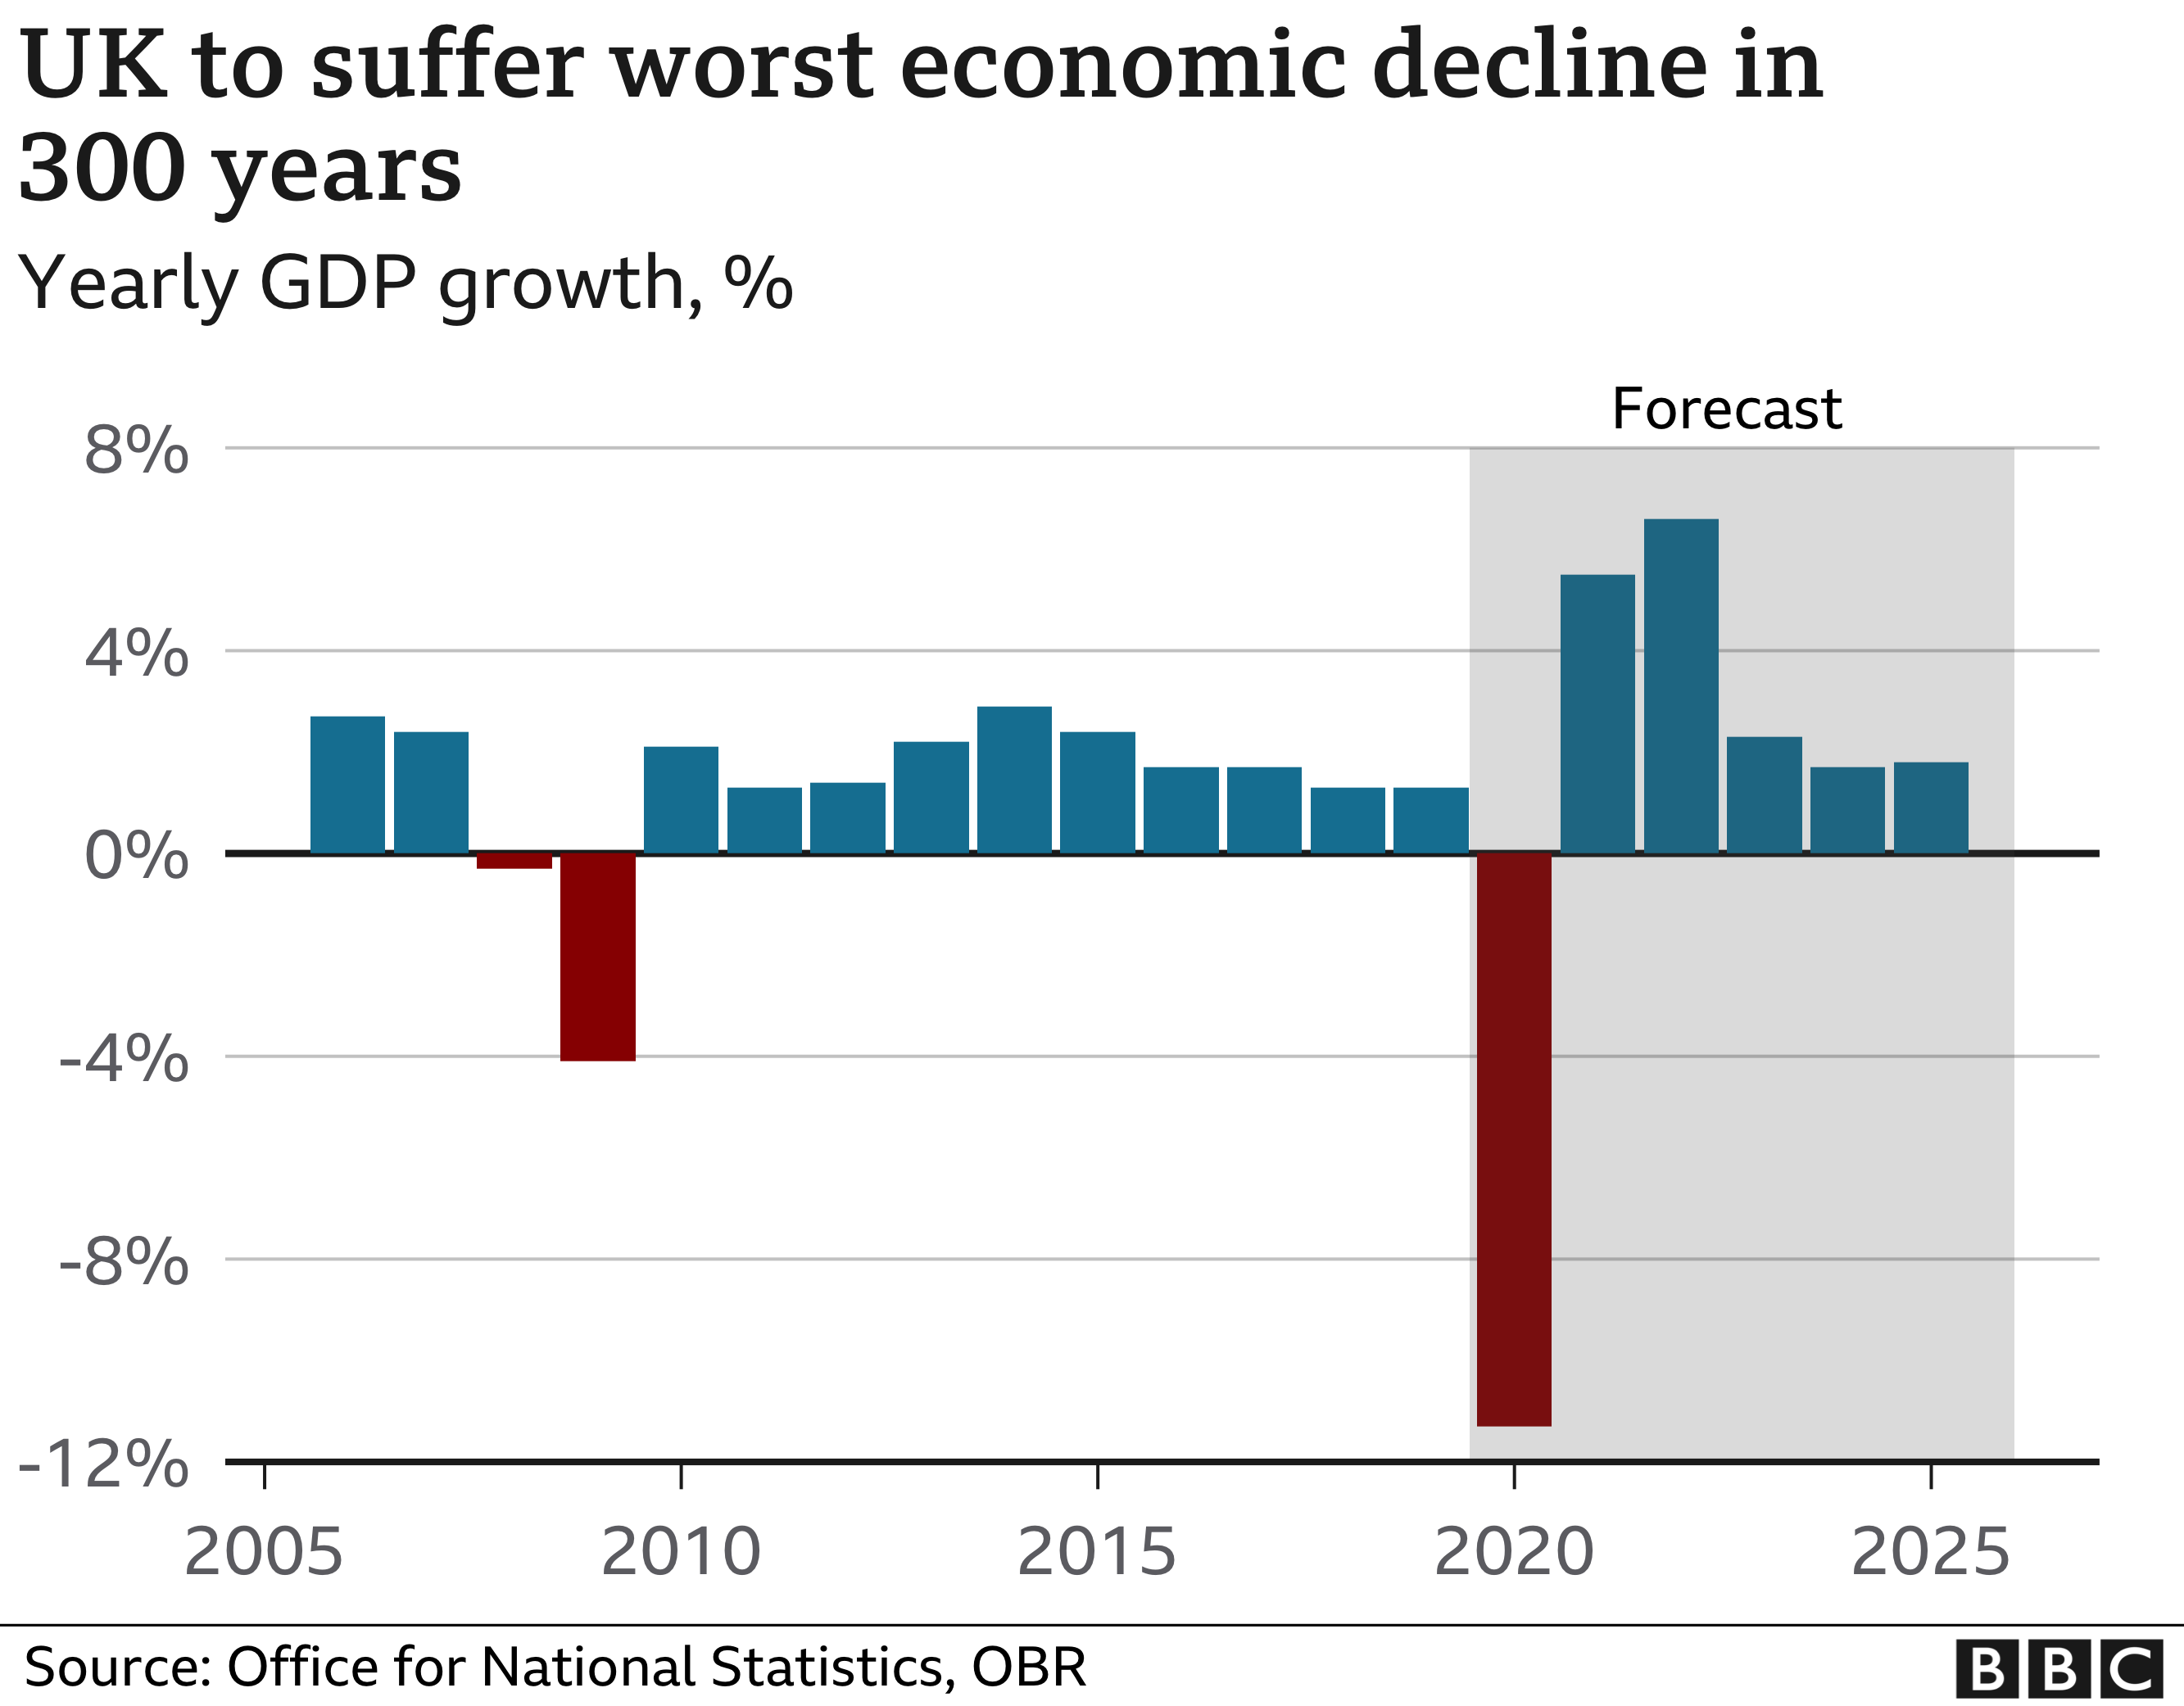 UK GDP forecasts show a big decline of 11.3% in 2020